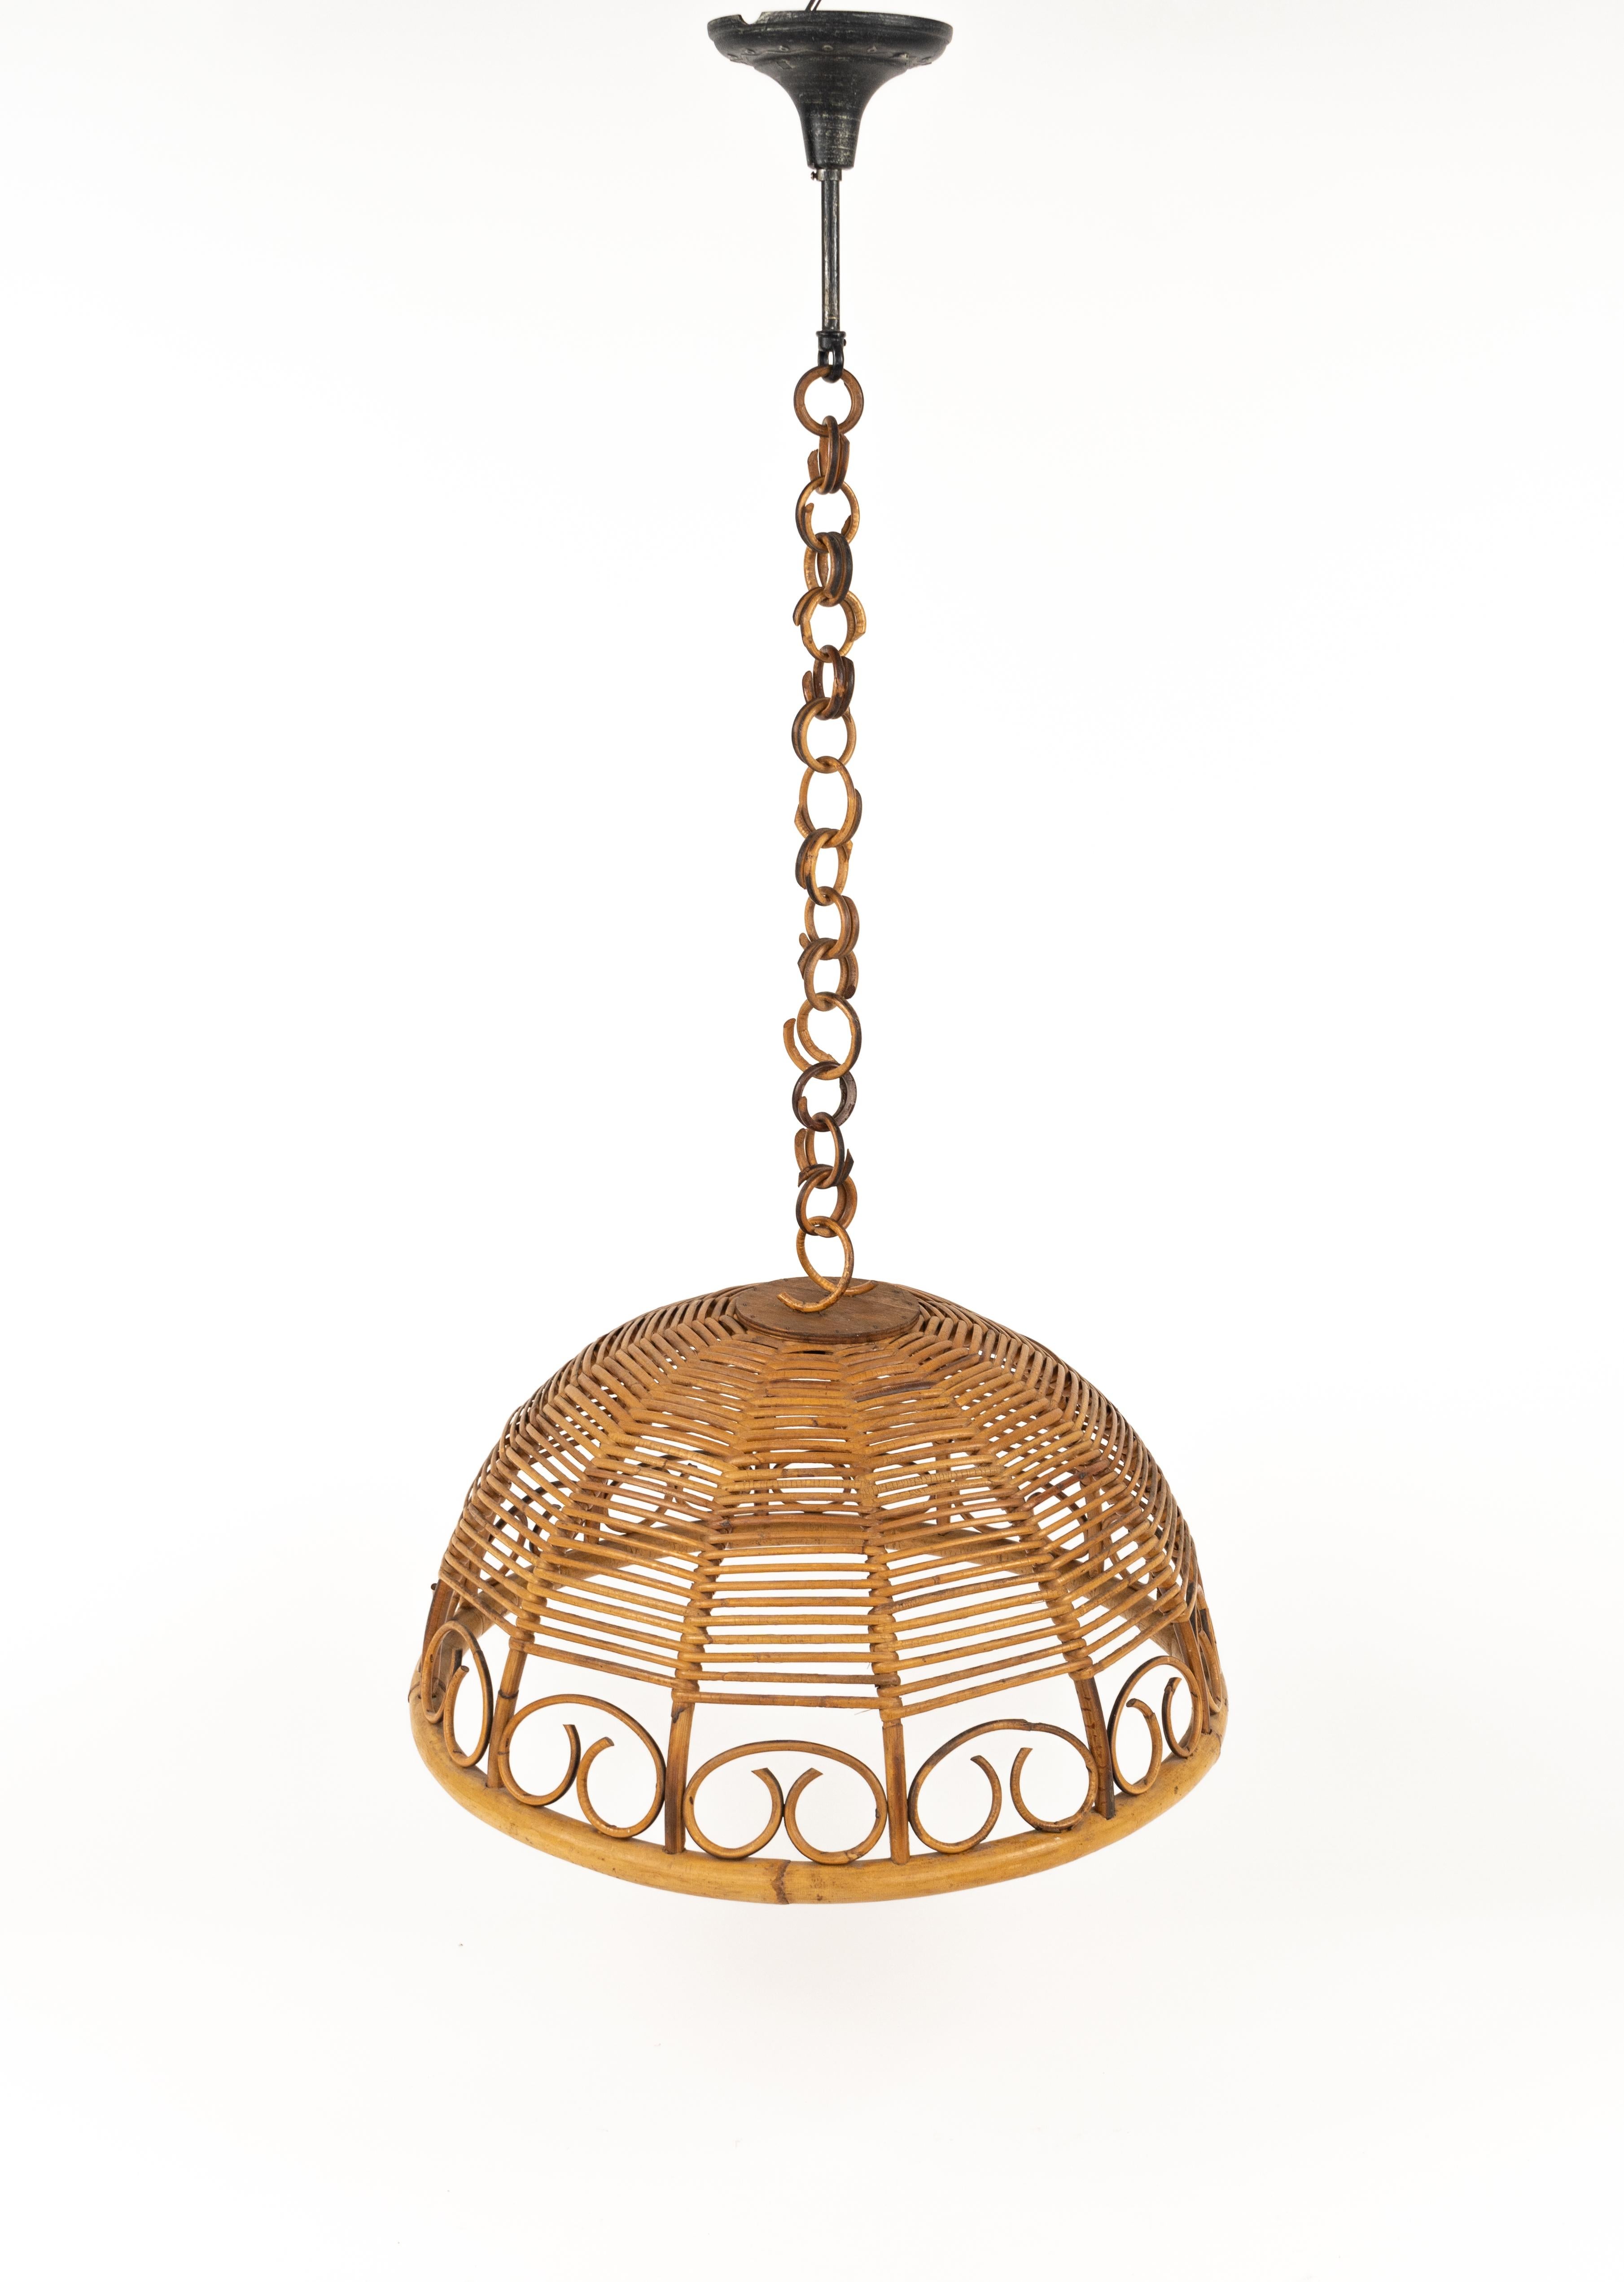 Metal Midcentury Rattan and Bamboo Chandelier Pendant, Italy 1960s For Sale